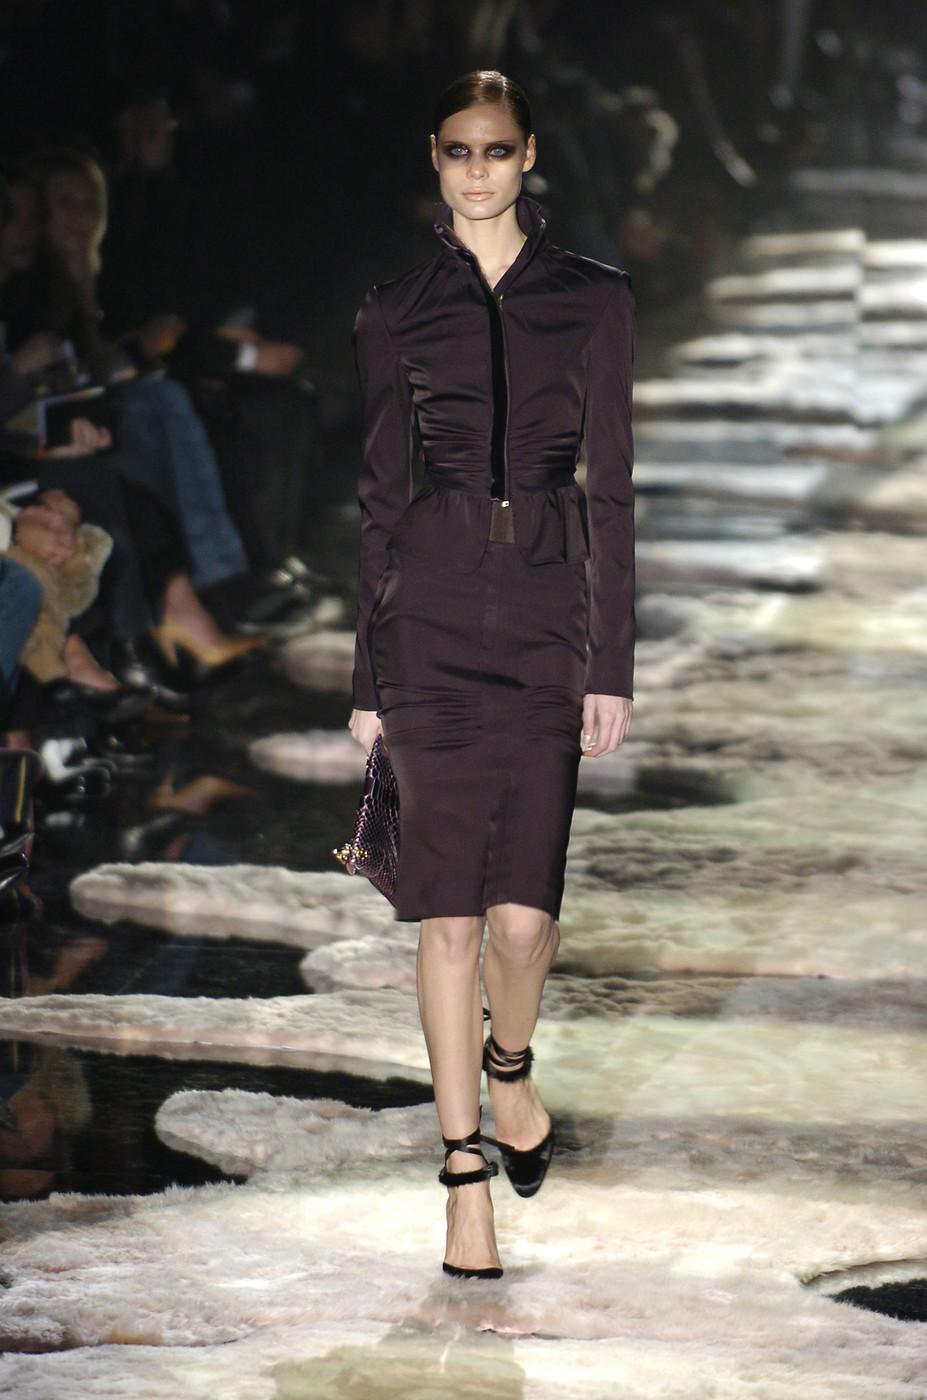 Tom Ford for Gucci Aubergine Stretch Dress Skirt Suit
F/W 2004 Collection - Look # 1
The emotional ending of the Tom Ford era at Gucci was a look back in glamour—a fabulous farewell in which this perfection-obsessed superstar of fashion seized the